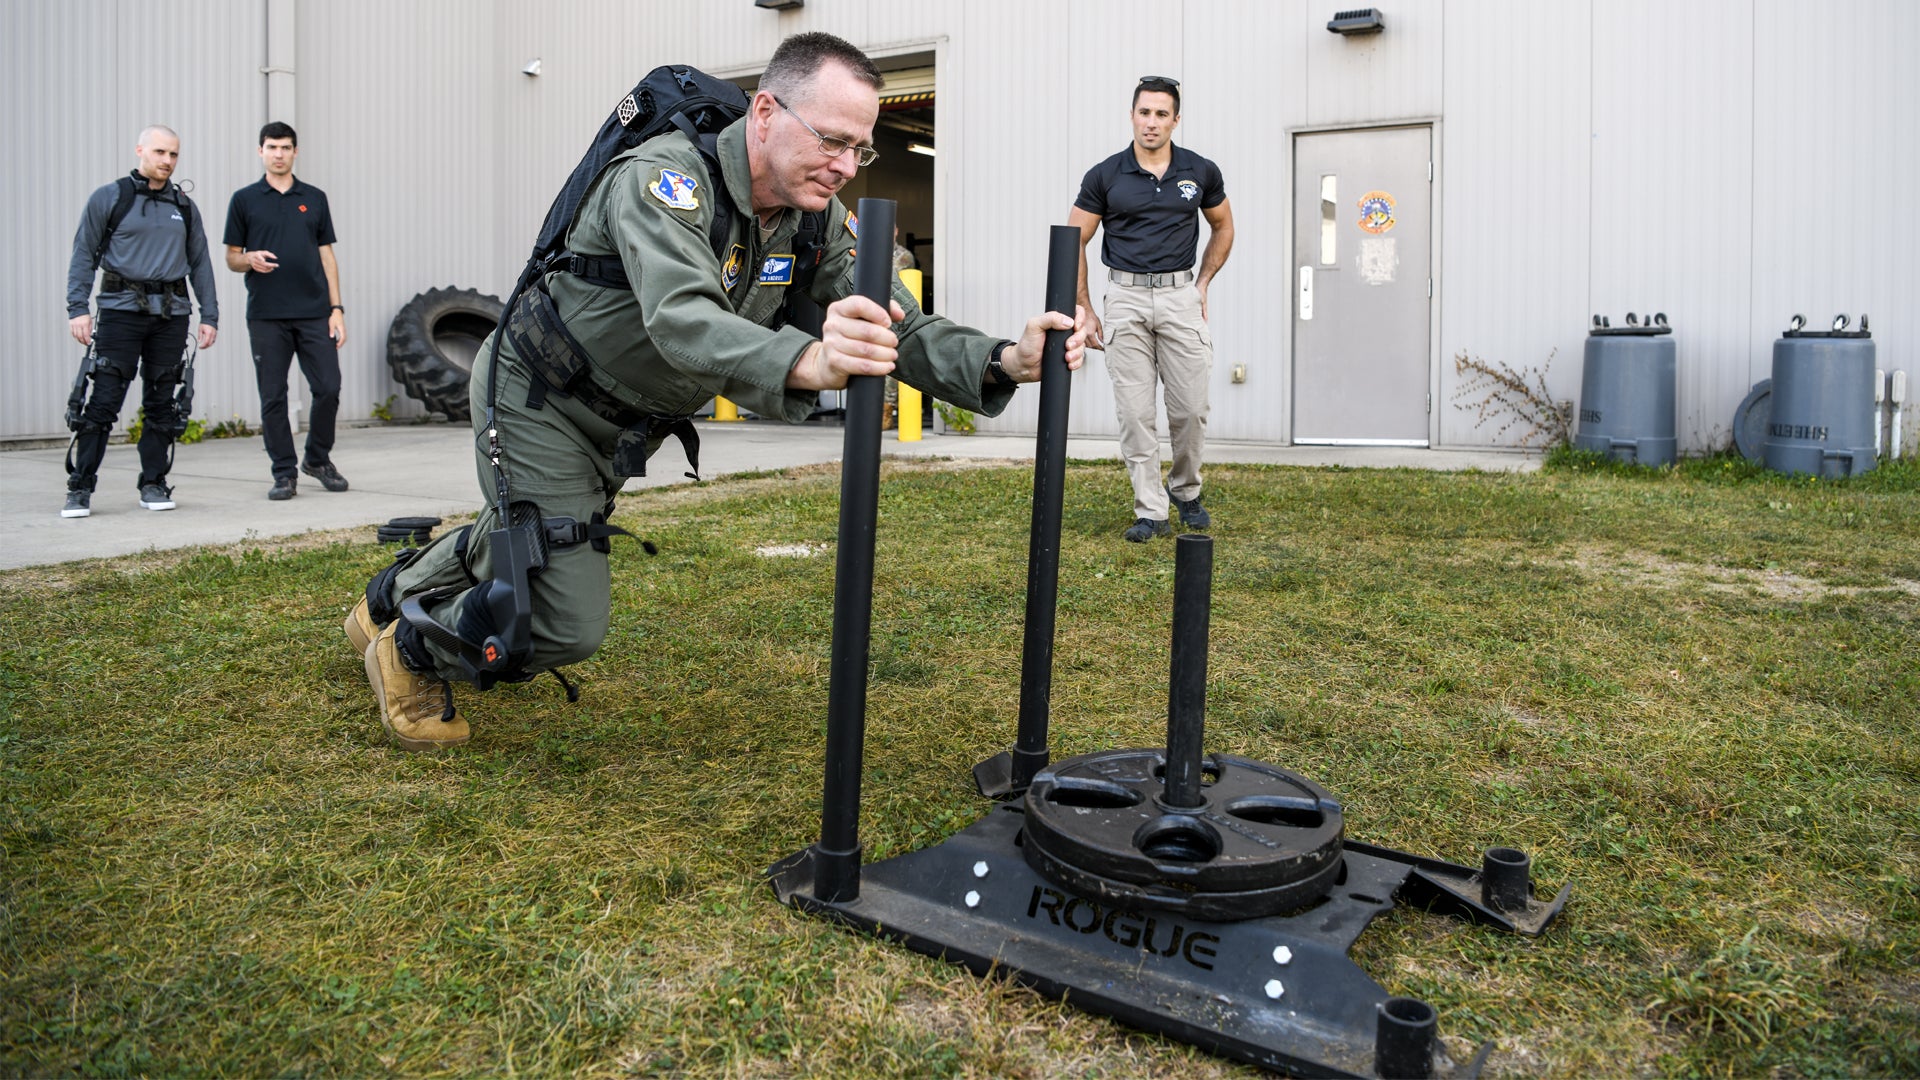 Brig. Gen. John Andrus, 711th Human Performance Wing commander, pushes a weighted sled while wearing the pneumatically-powered exoskeleton during an Air Force Research Laboratory demonstration at Wright-Patterson Air Force Base, Ohio, Oct. 6, 2022. (Patrick O’Reilly/U.S. Air Force)